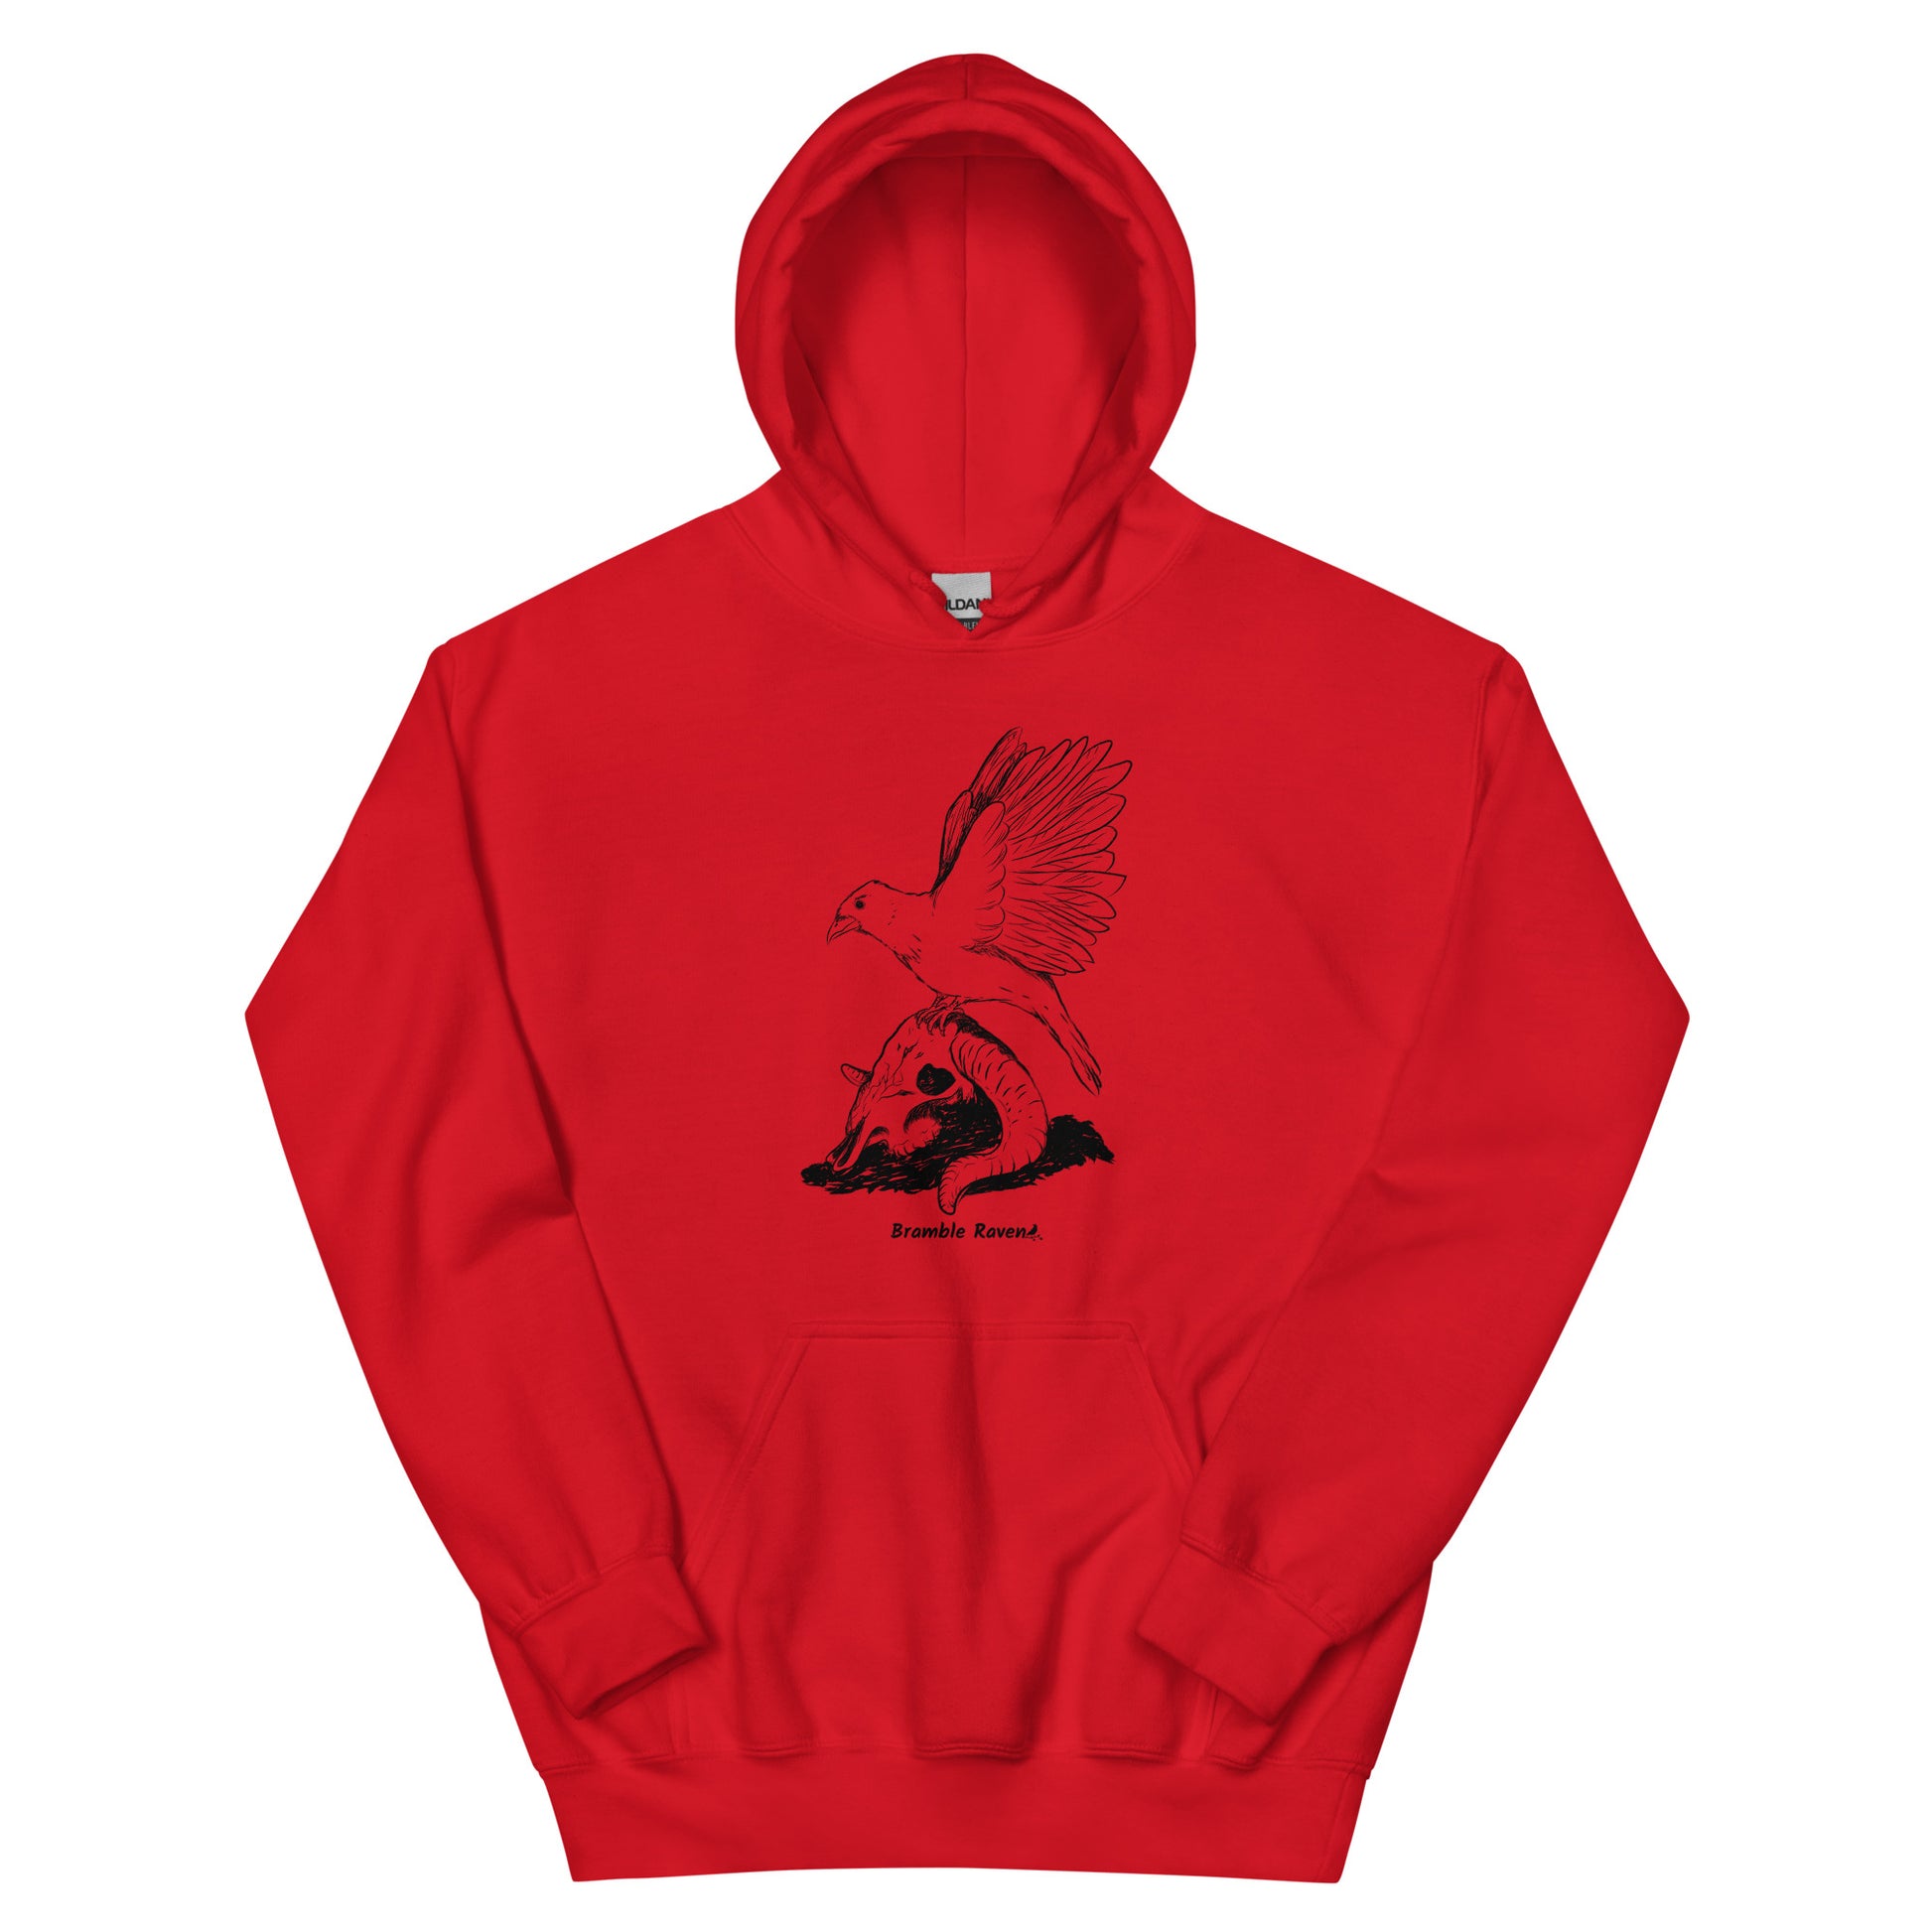 Red colored unisex Reflections hoodie. Features image of a crow with wings outstretched sitting on a sheep skull.  Has a front pouch pocket and double lined hood.